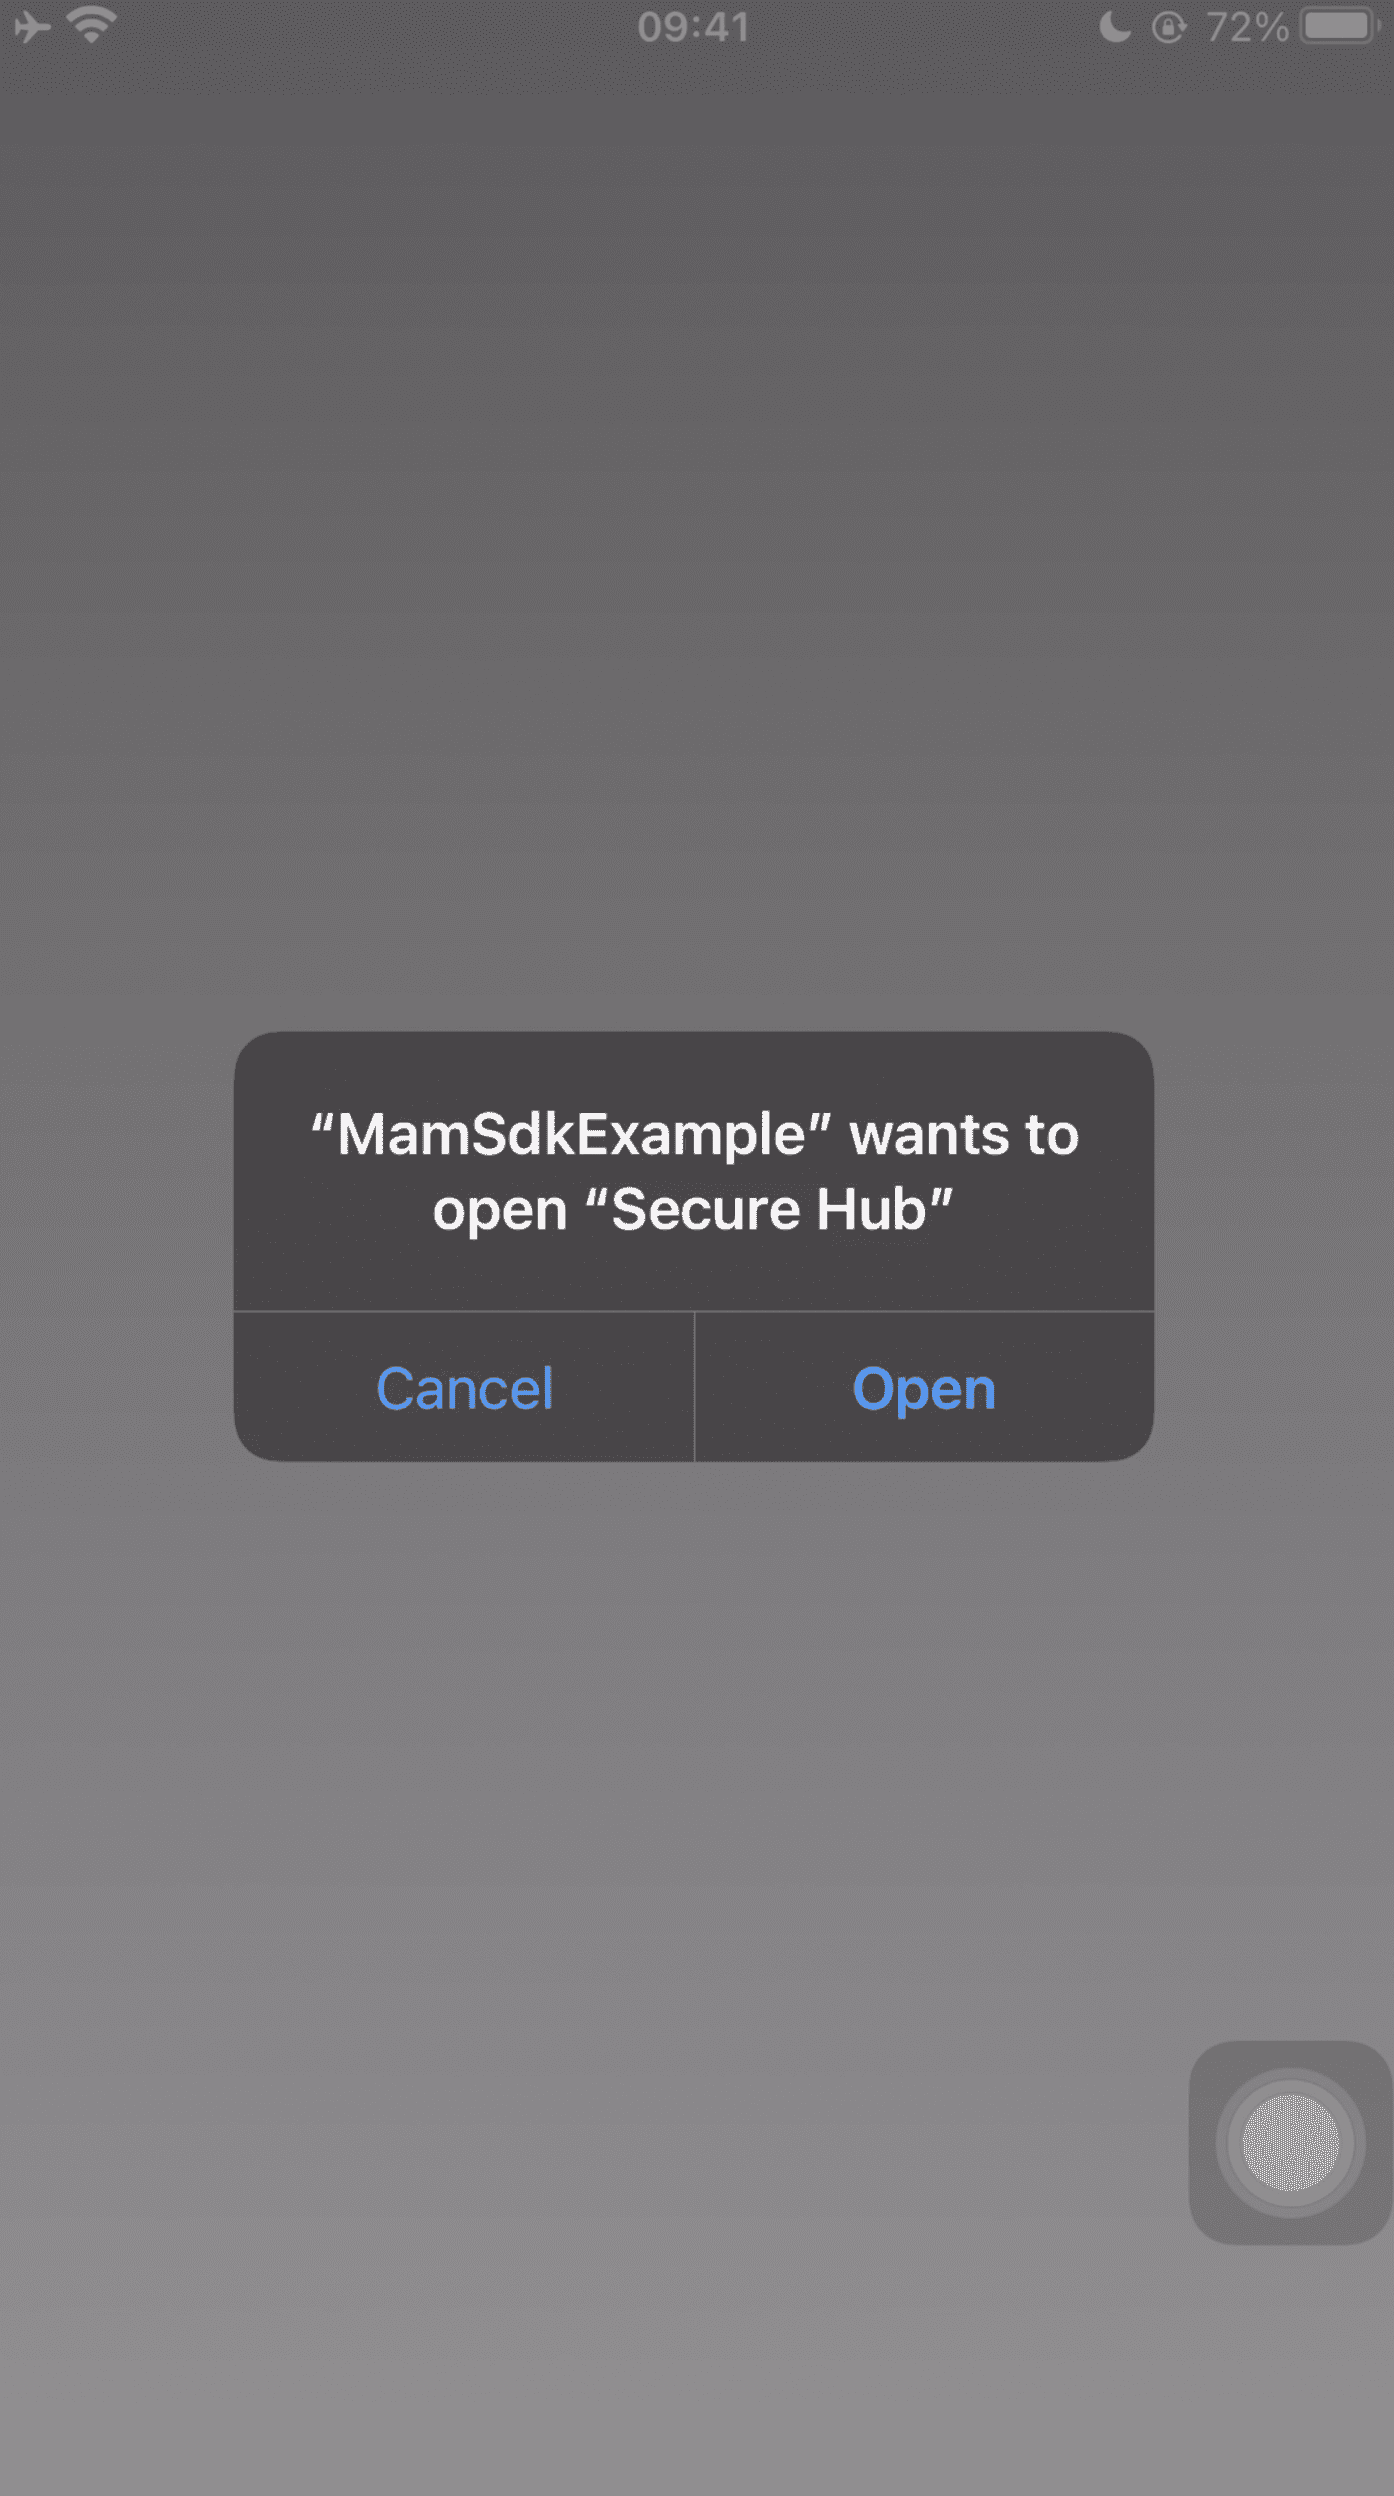 App requests to open Secure Hub